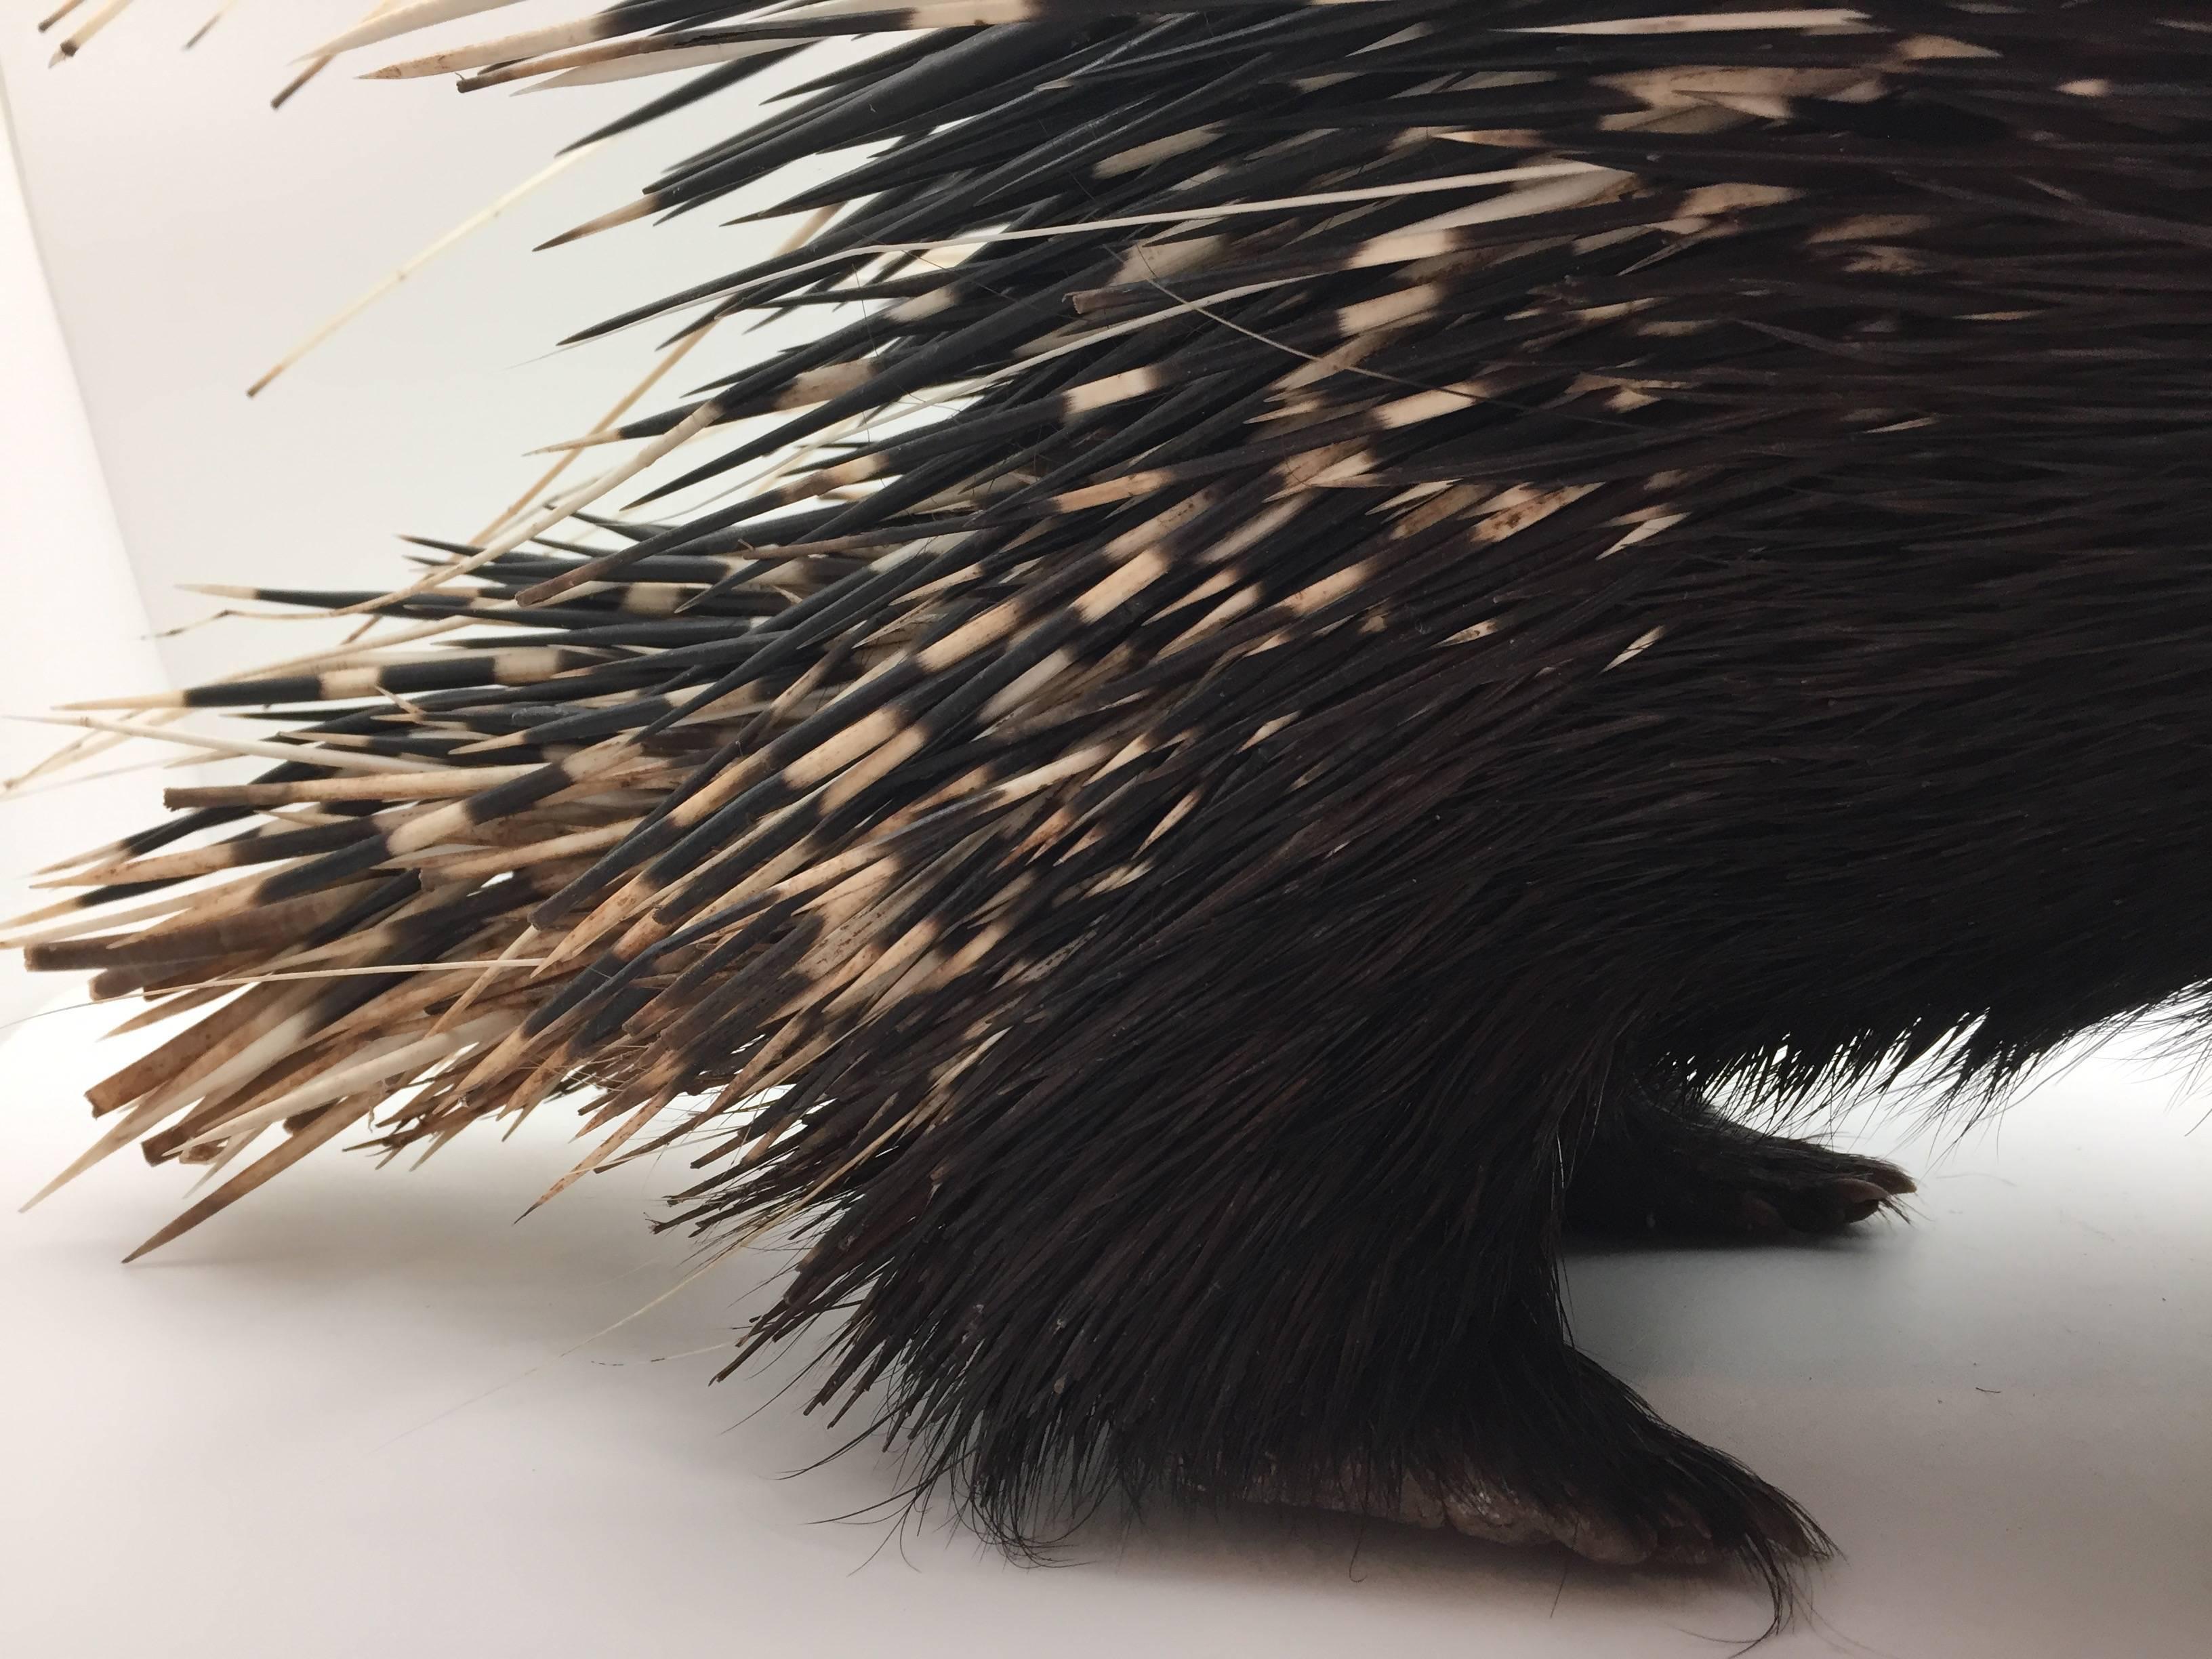 Animal Skin Large South African Crested Porcupine or Hystrix Cristata